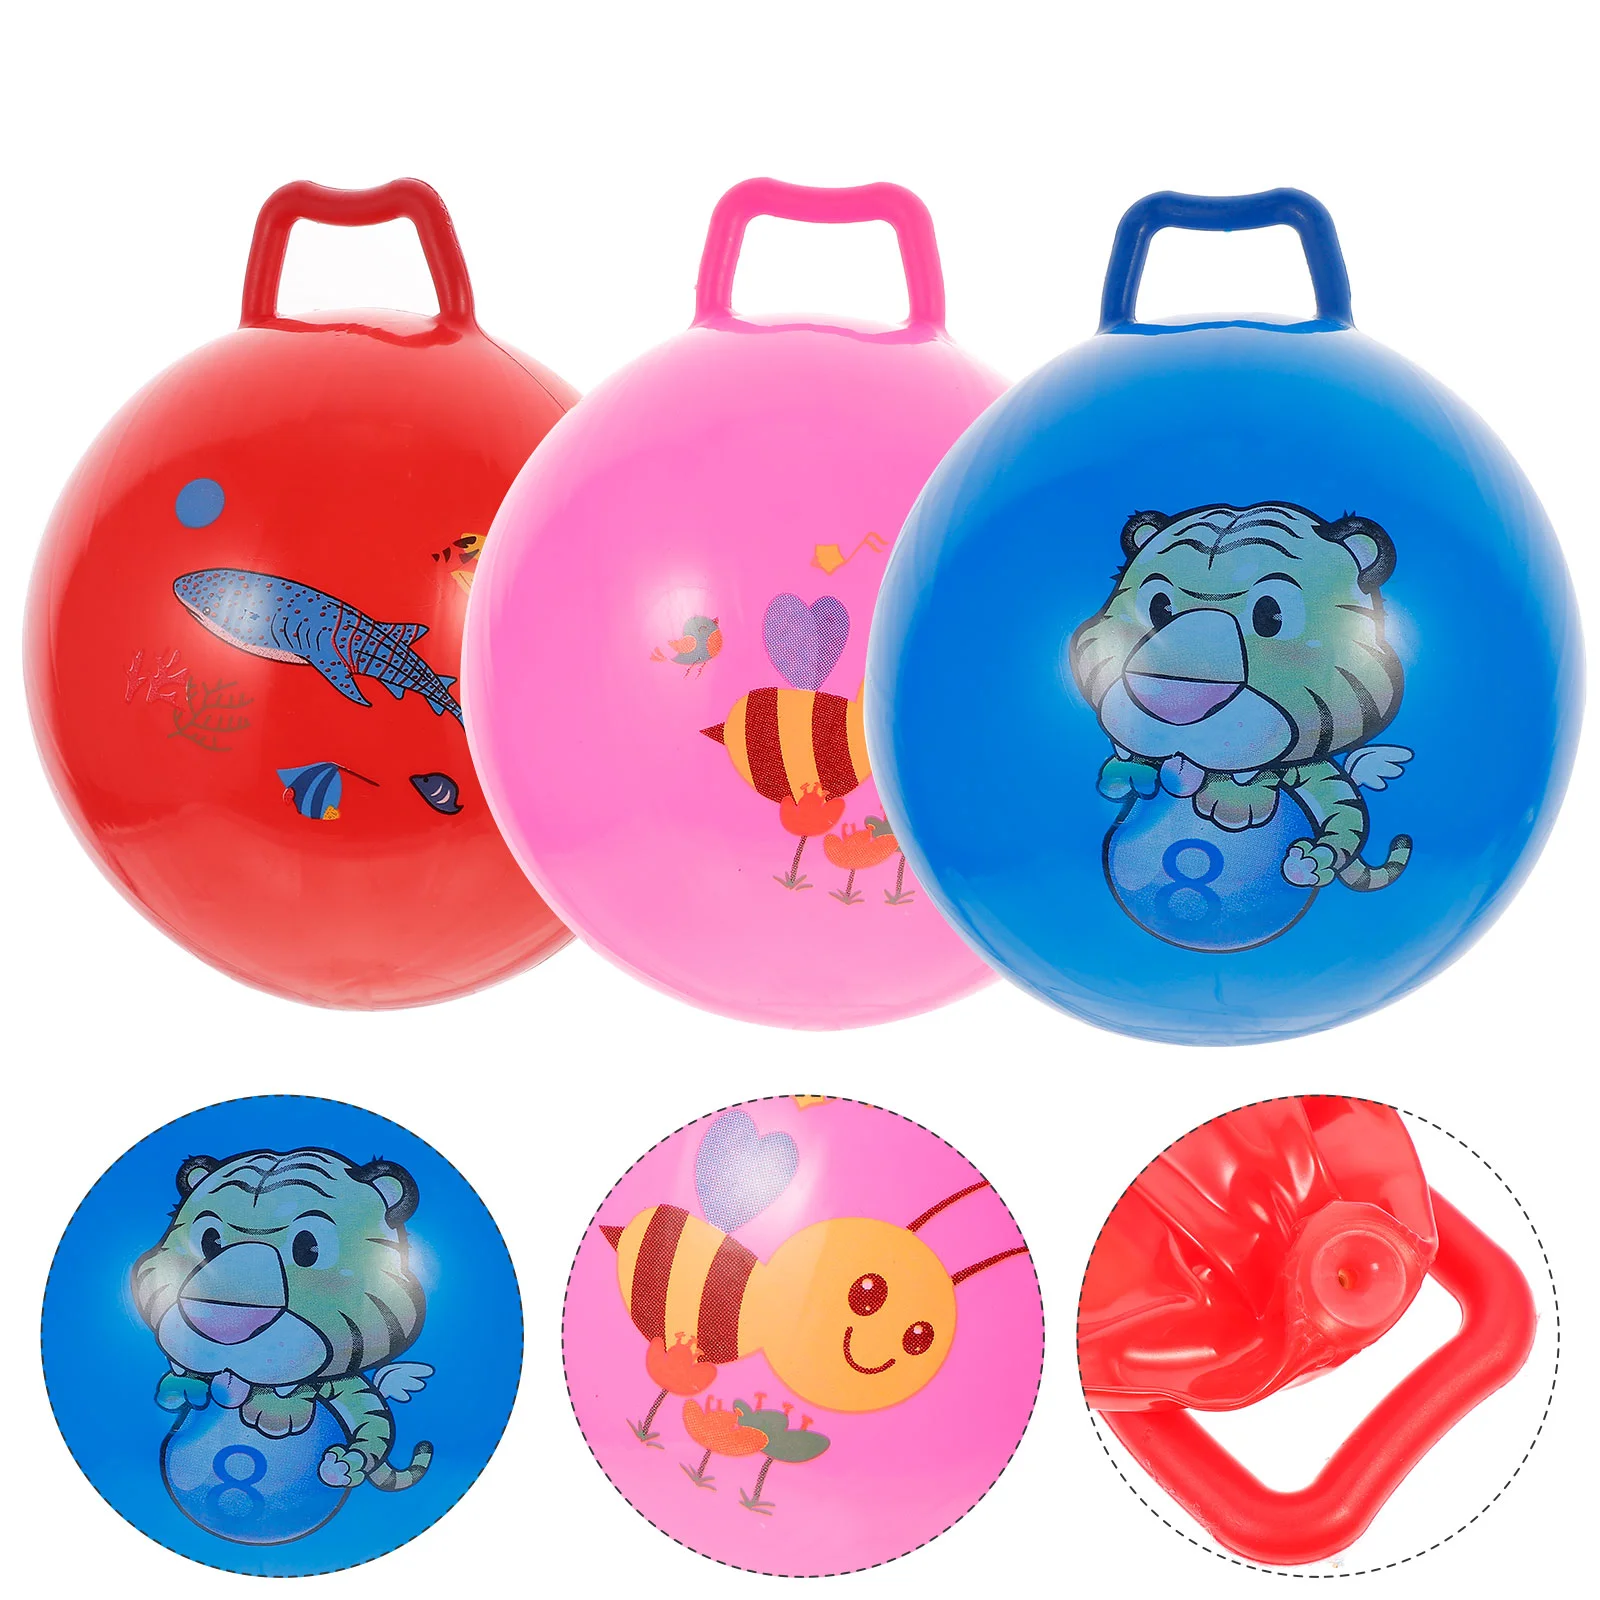 3 Pcs Ball Inflatable Toy Jumping with Handle Kids Educational Toys Aldult - £10.97 GBP